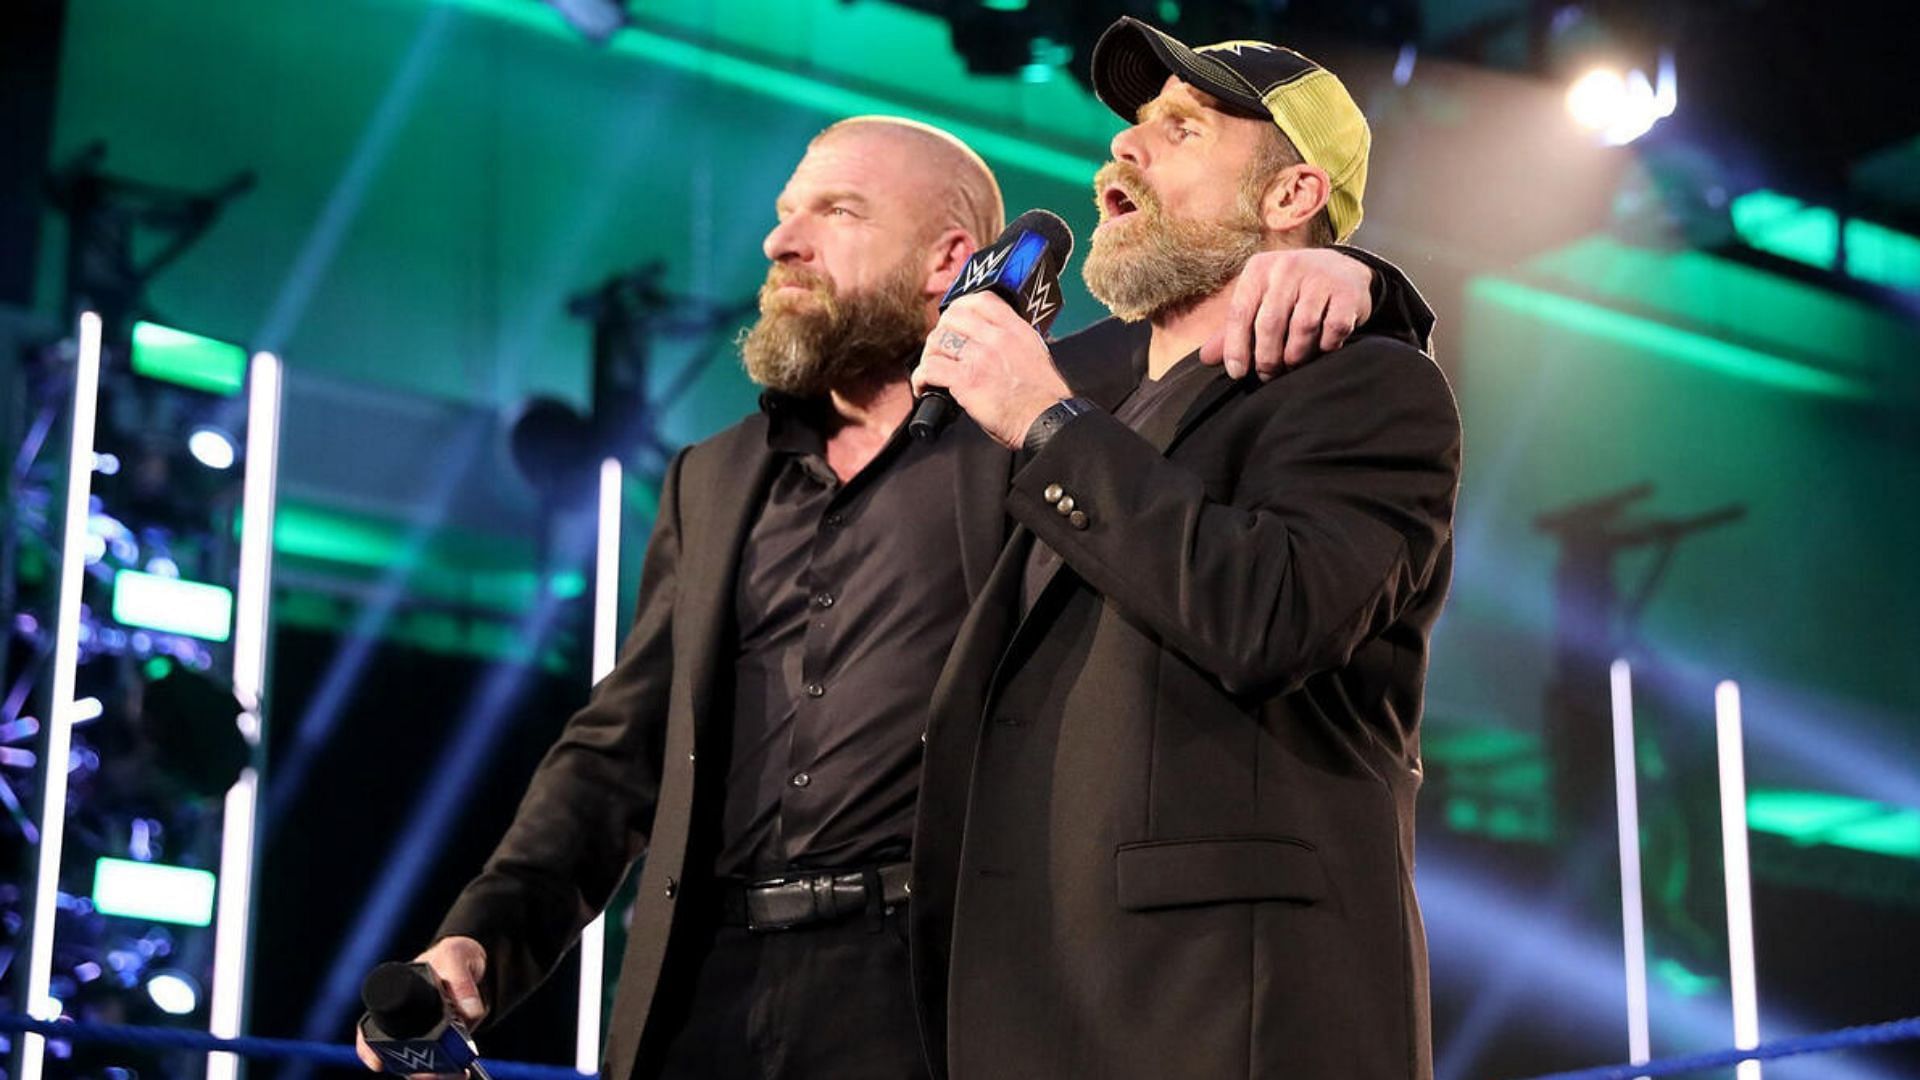 Triple H and Shawn Michaels on SmackDown in 2020!